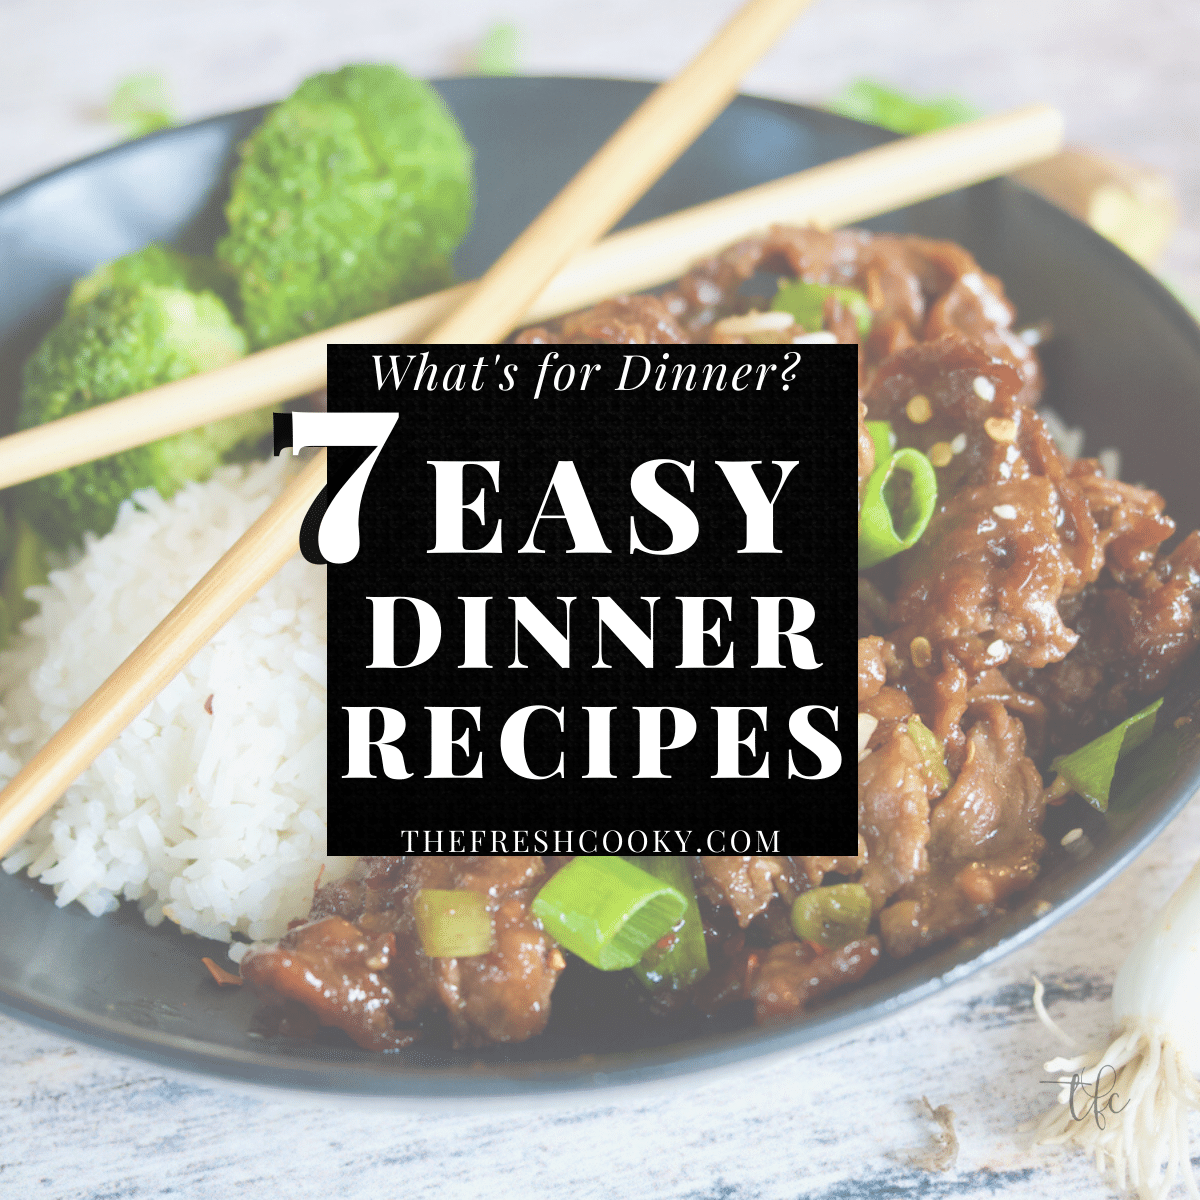 7 Easy Dinner Recipes to answer the question What's for Dinner? with image of Mongolian Beef and rice bowl in background.